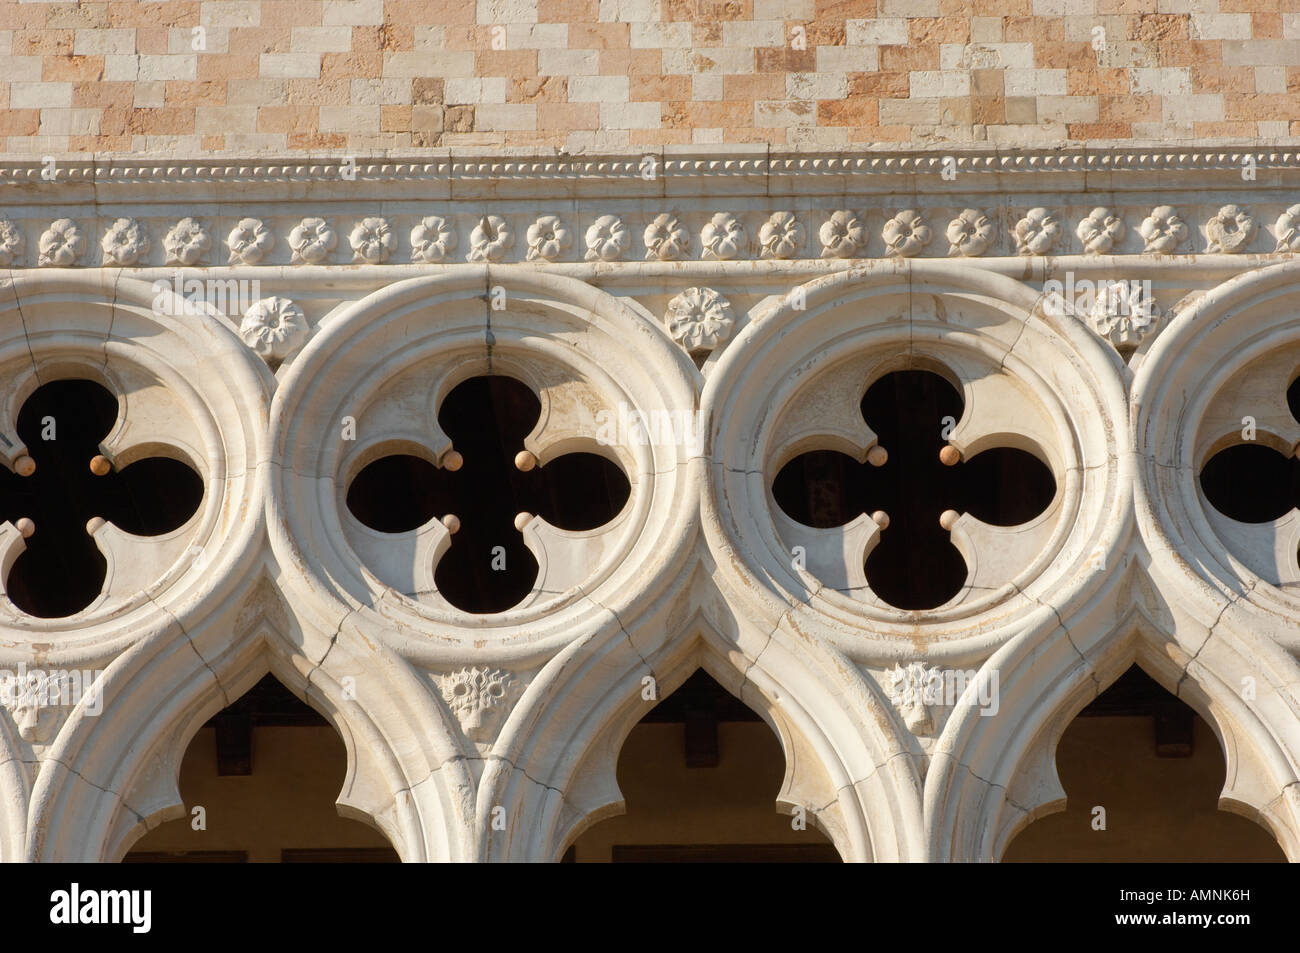 Architectural detail of the Gothic style stone work on the top of columns on the facade of the Doge's Palace Venice, Italy. Stock Photo